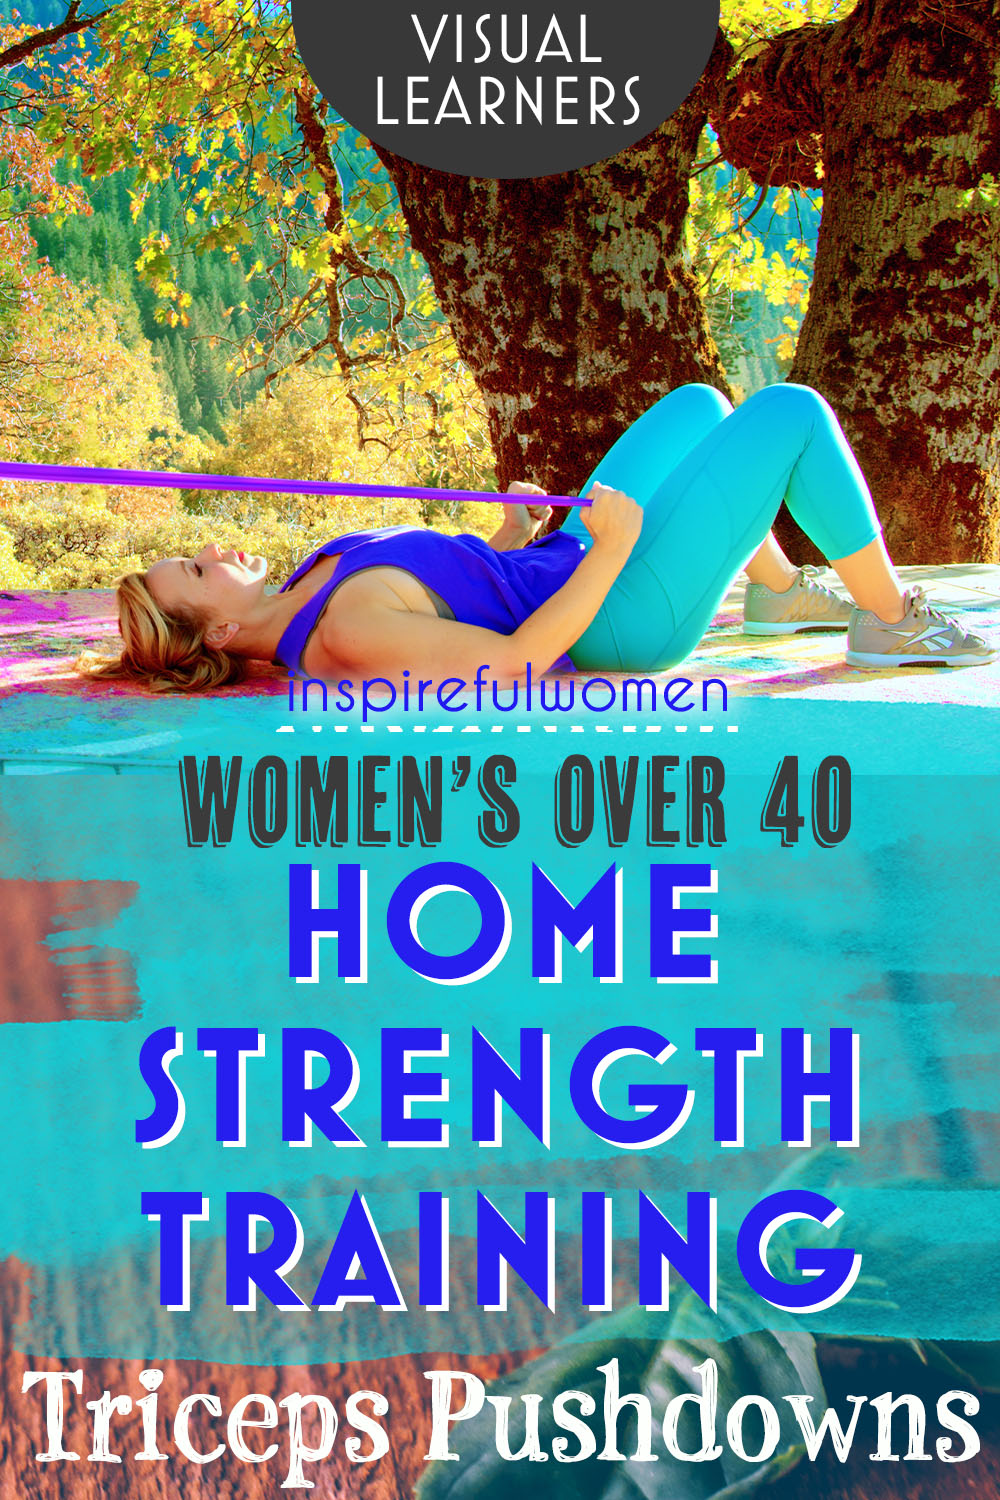 floor-lying-band-triceps-push-down-flabby-underarm-resistance-exercise-at-home-women-40+